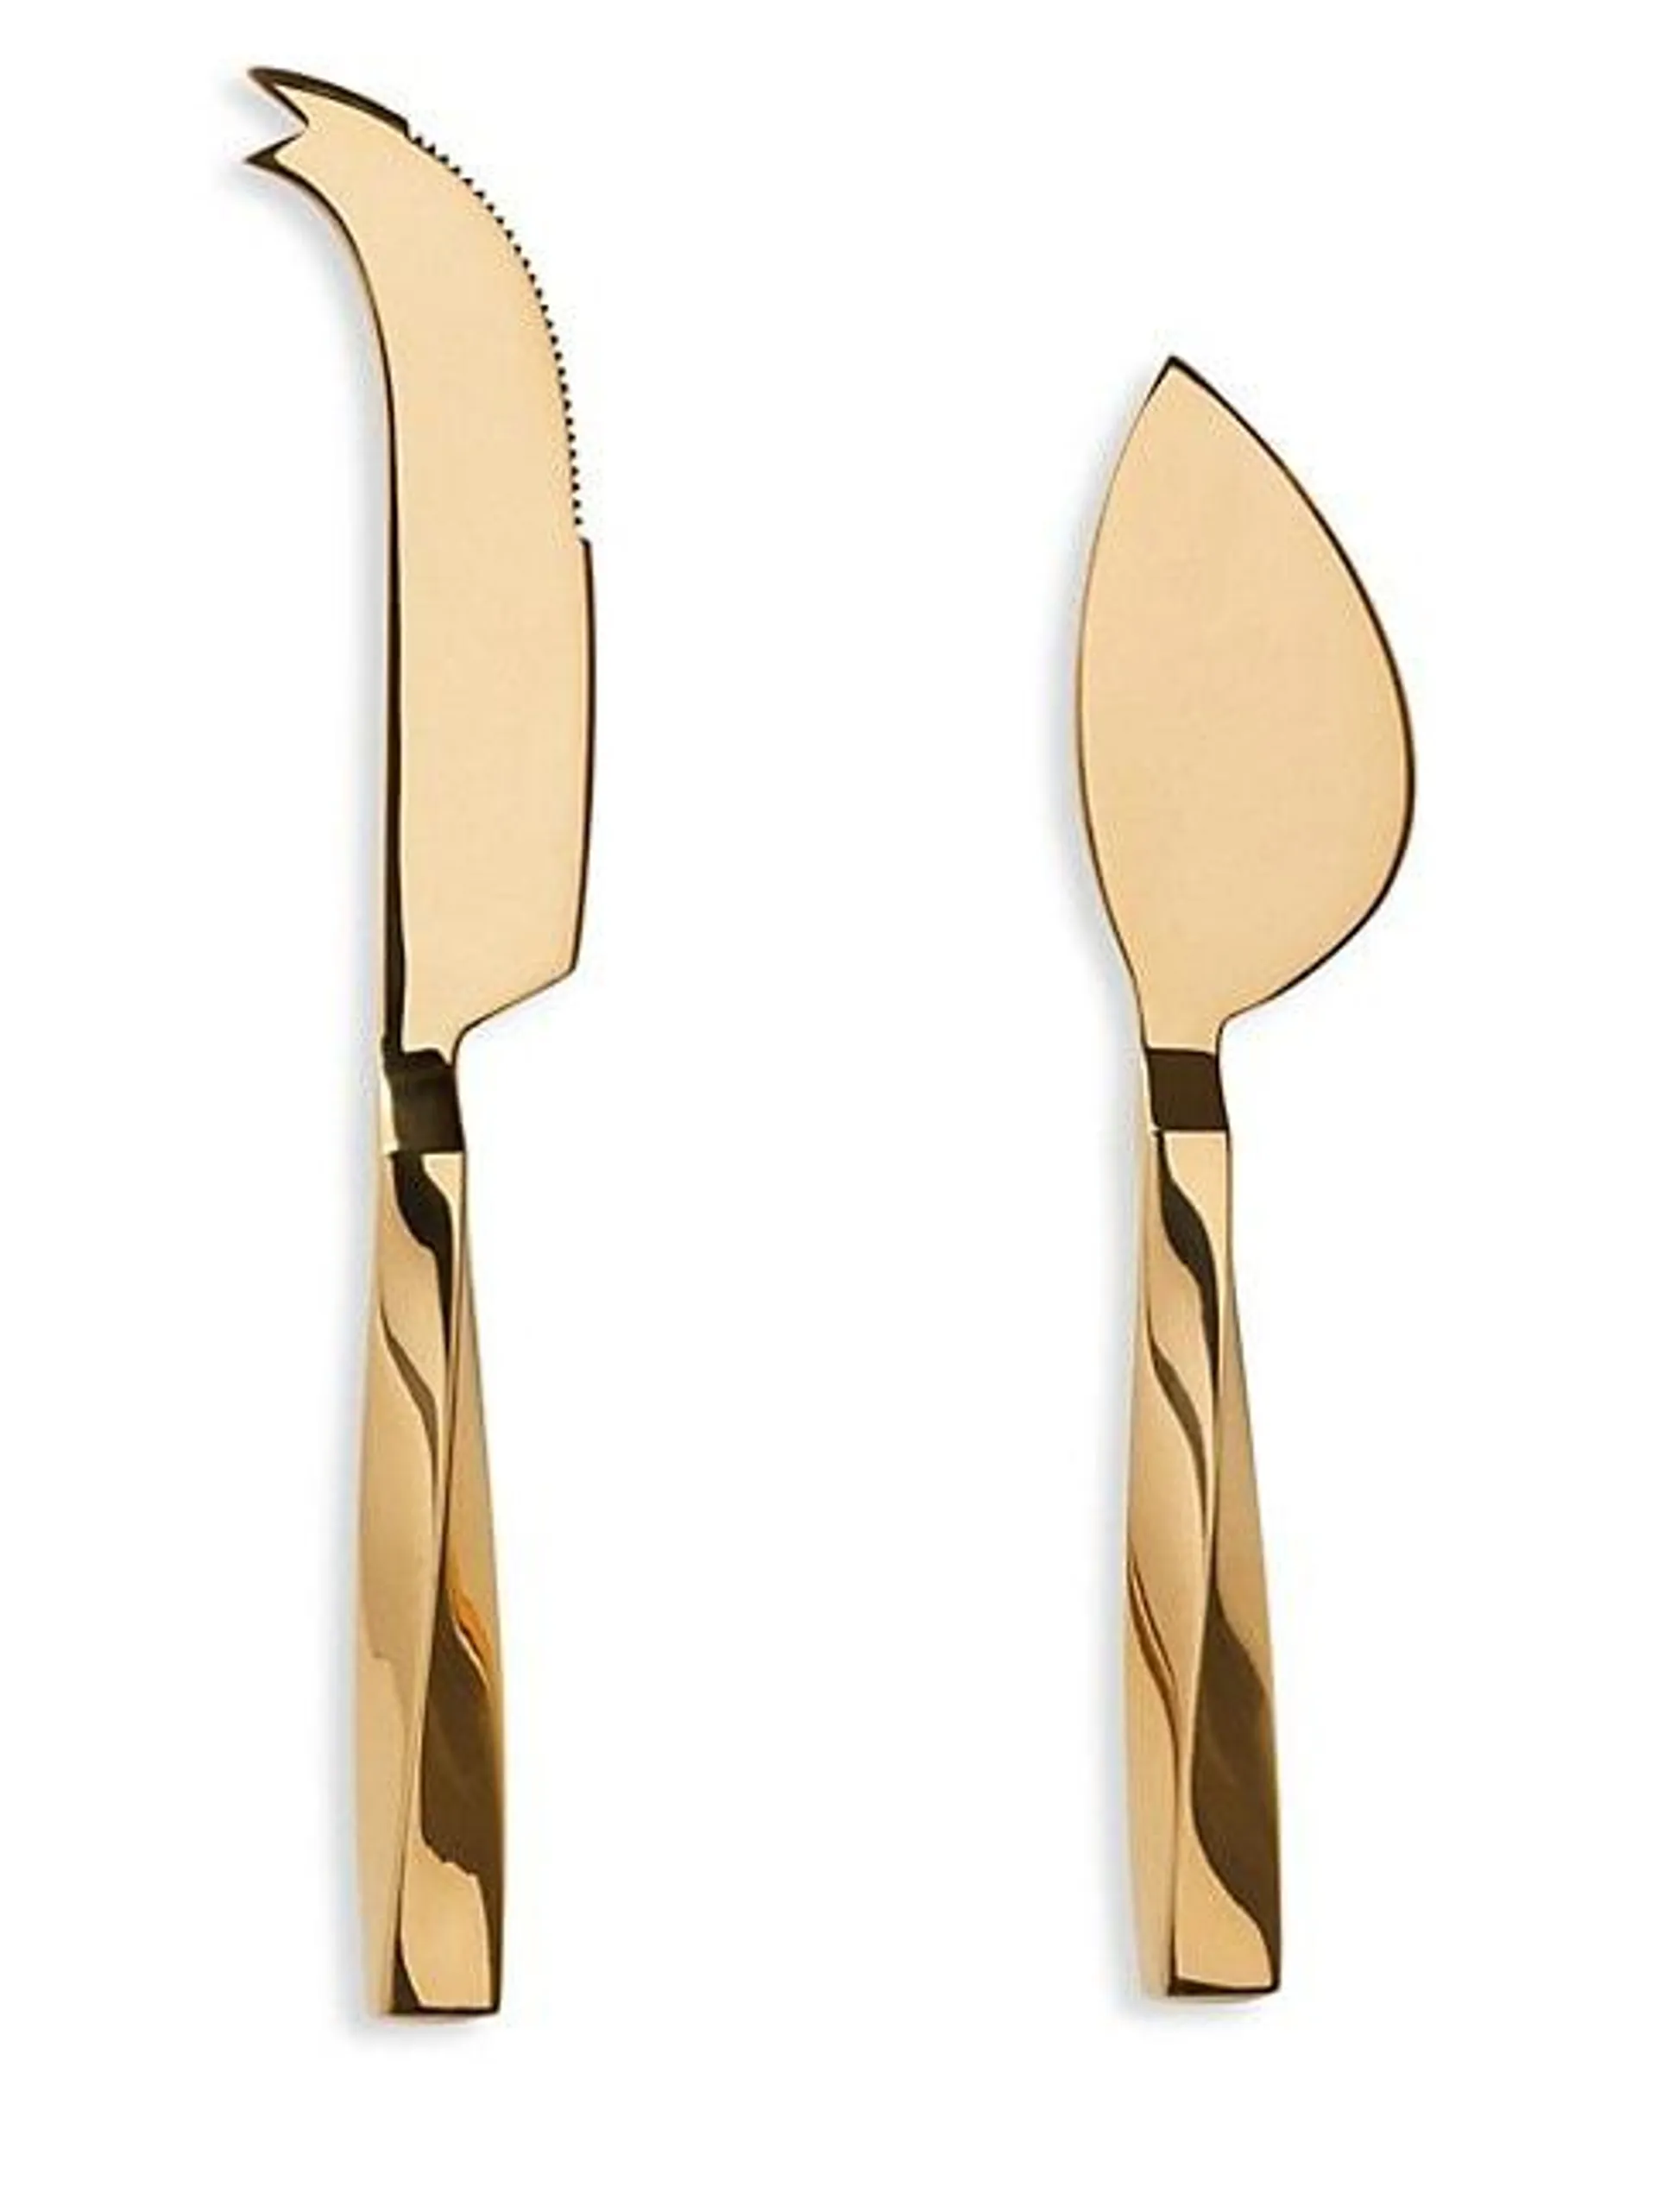 Set of Two Leon Stainless Steel Cheese Knives